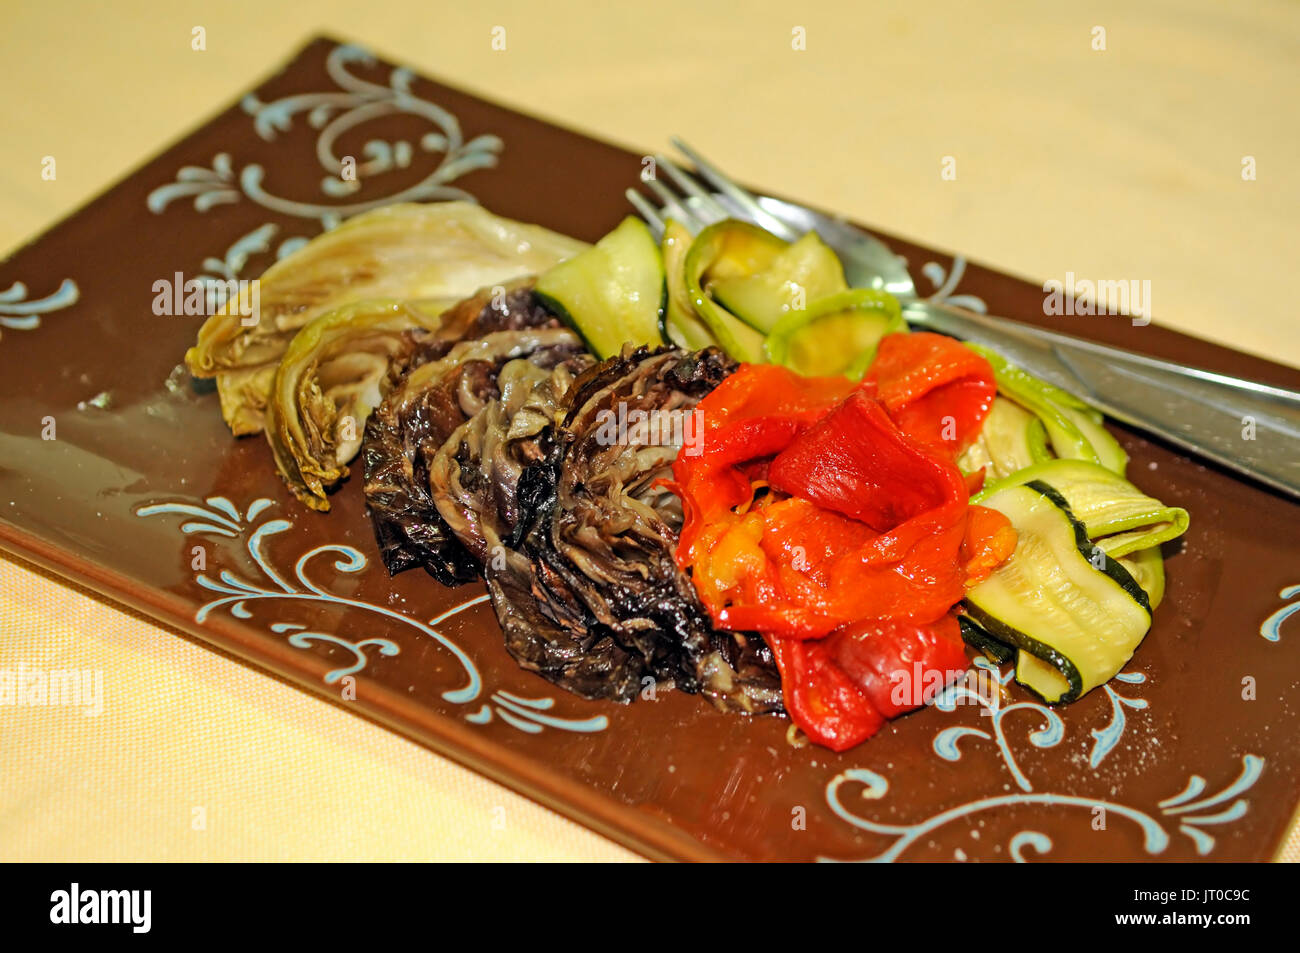 grilled vegetables on the brown dish, Oristano, Sardinia, Italy Stock Photo